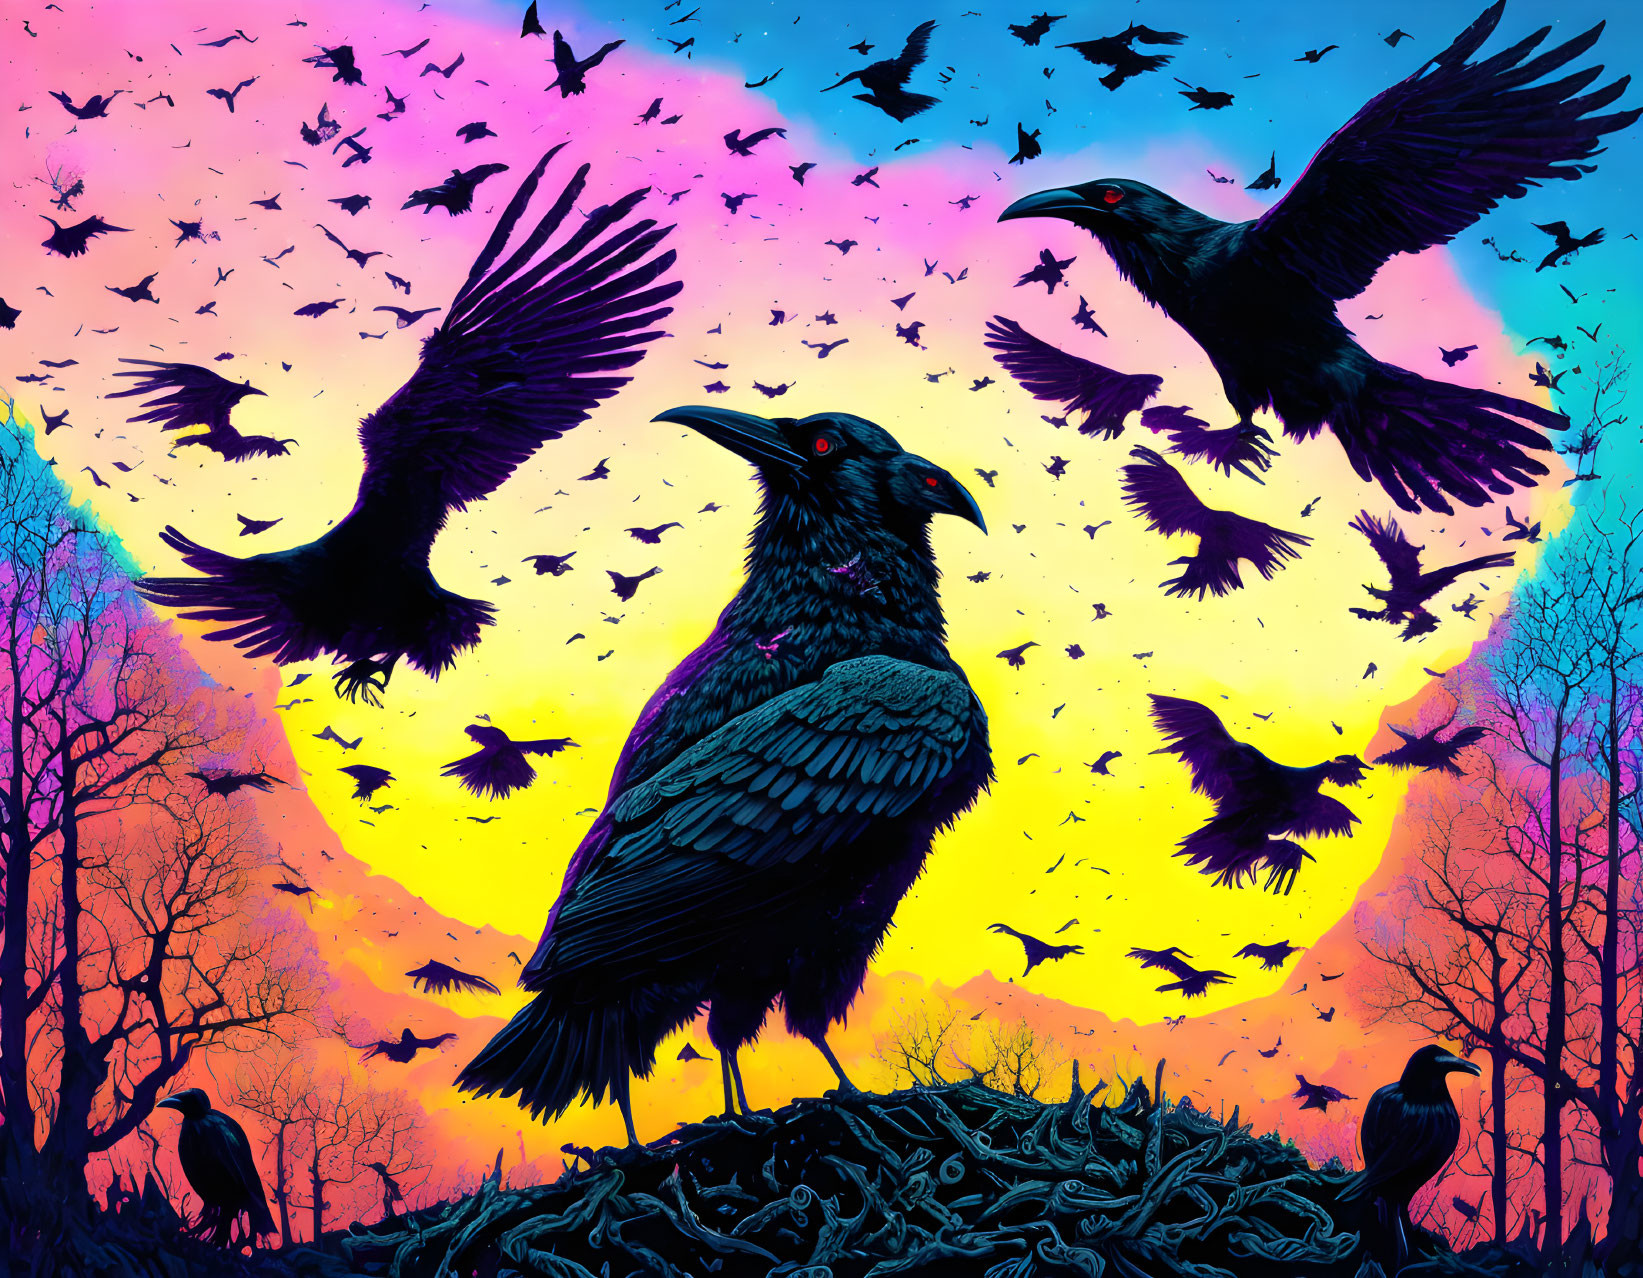 Colorful sunset sky with crows around nest and trees